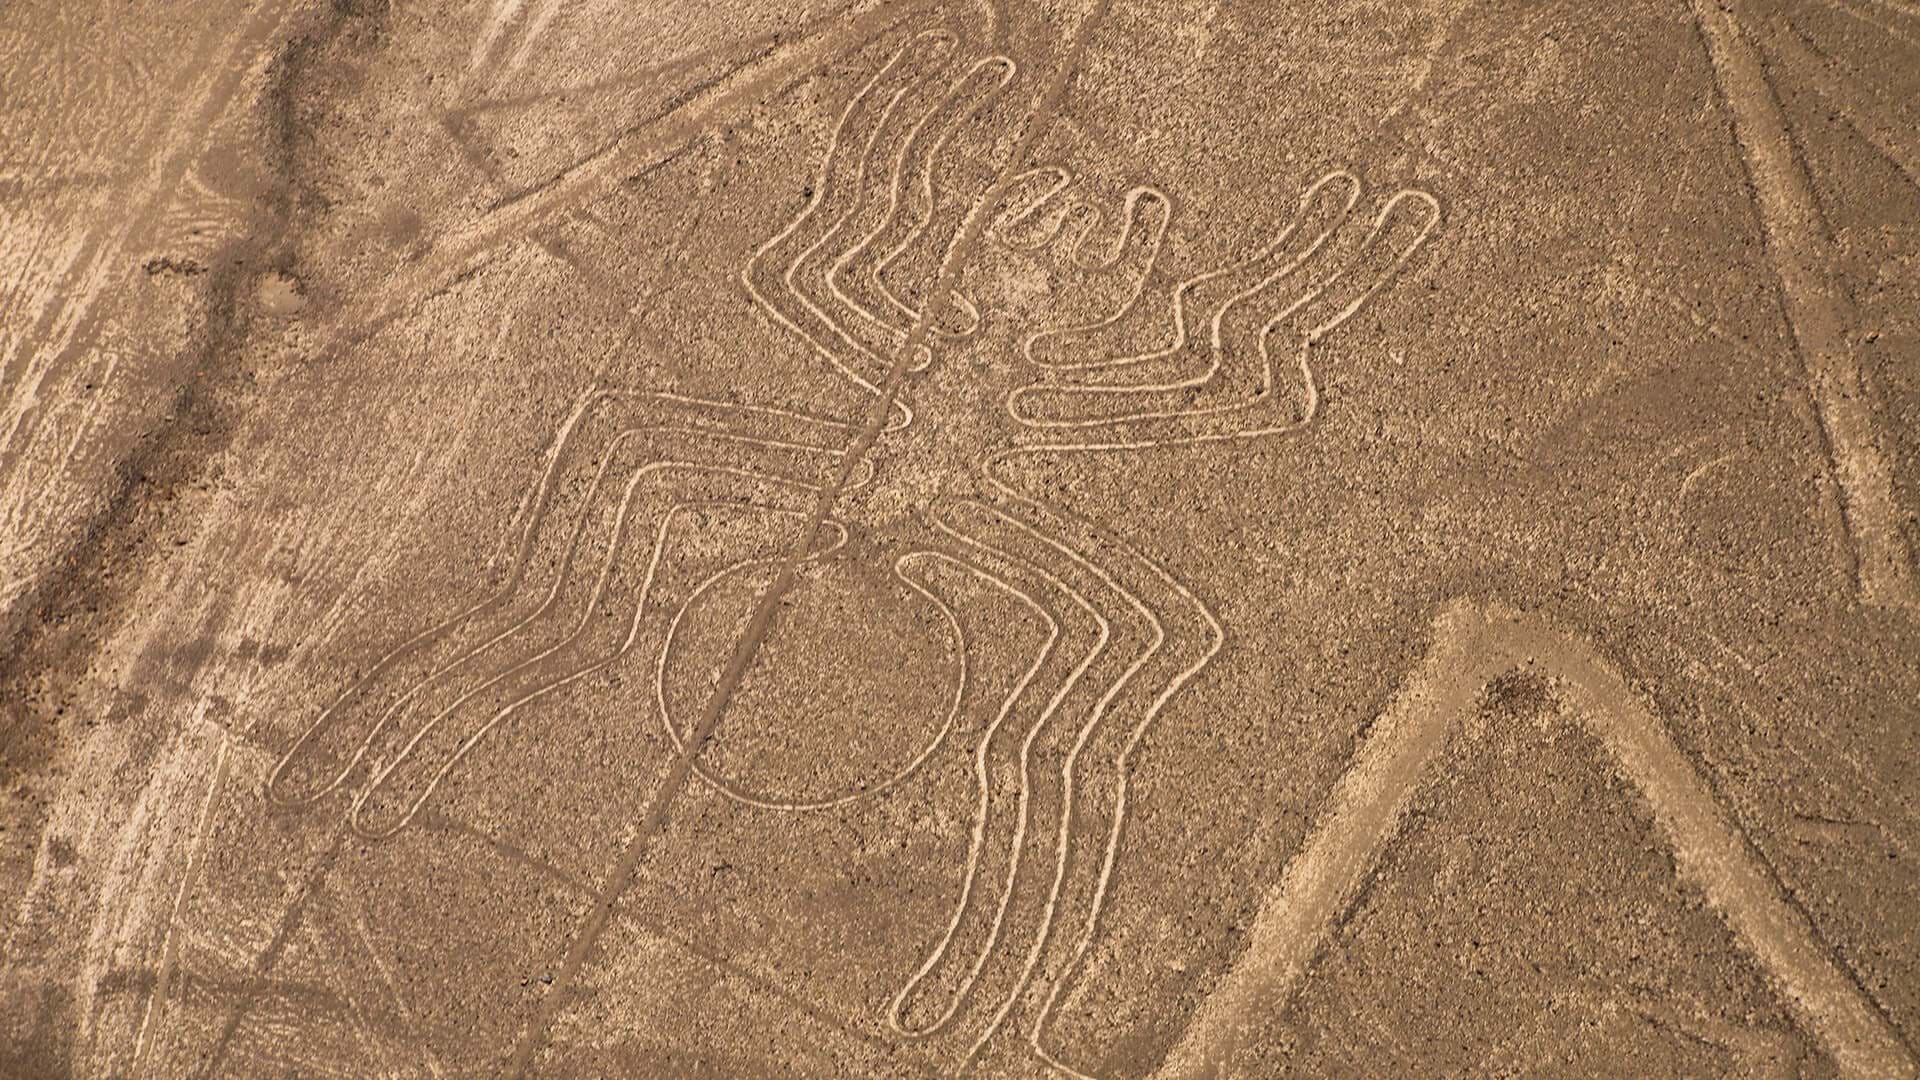 The Nasca lines: Messages for the gods?